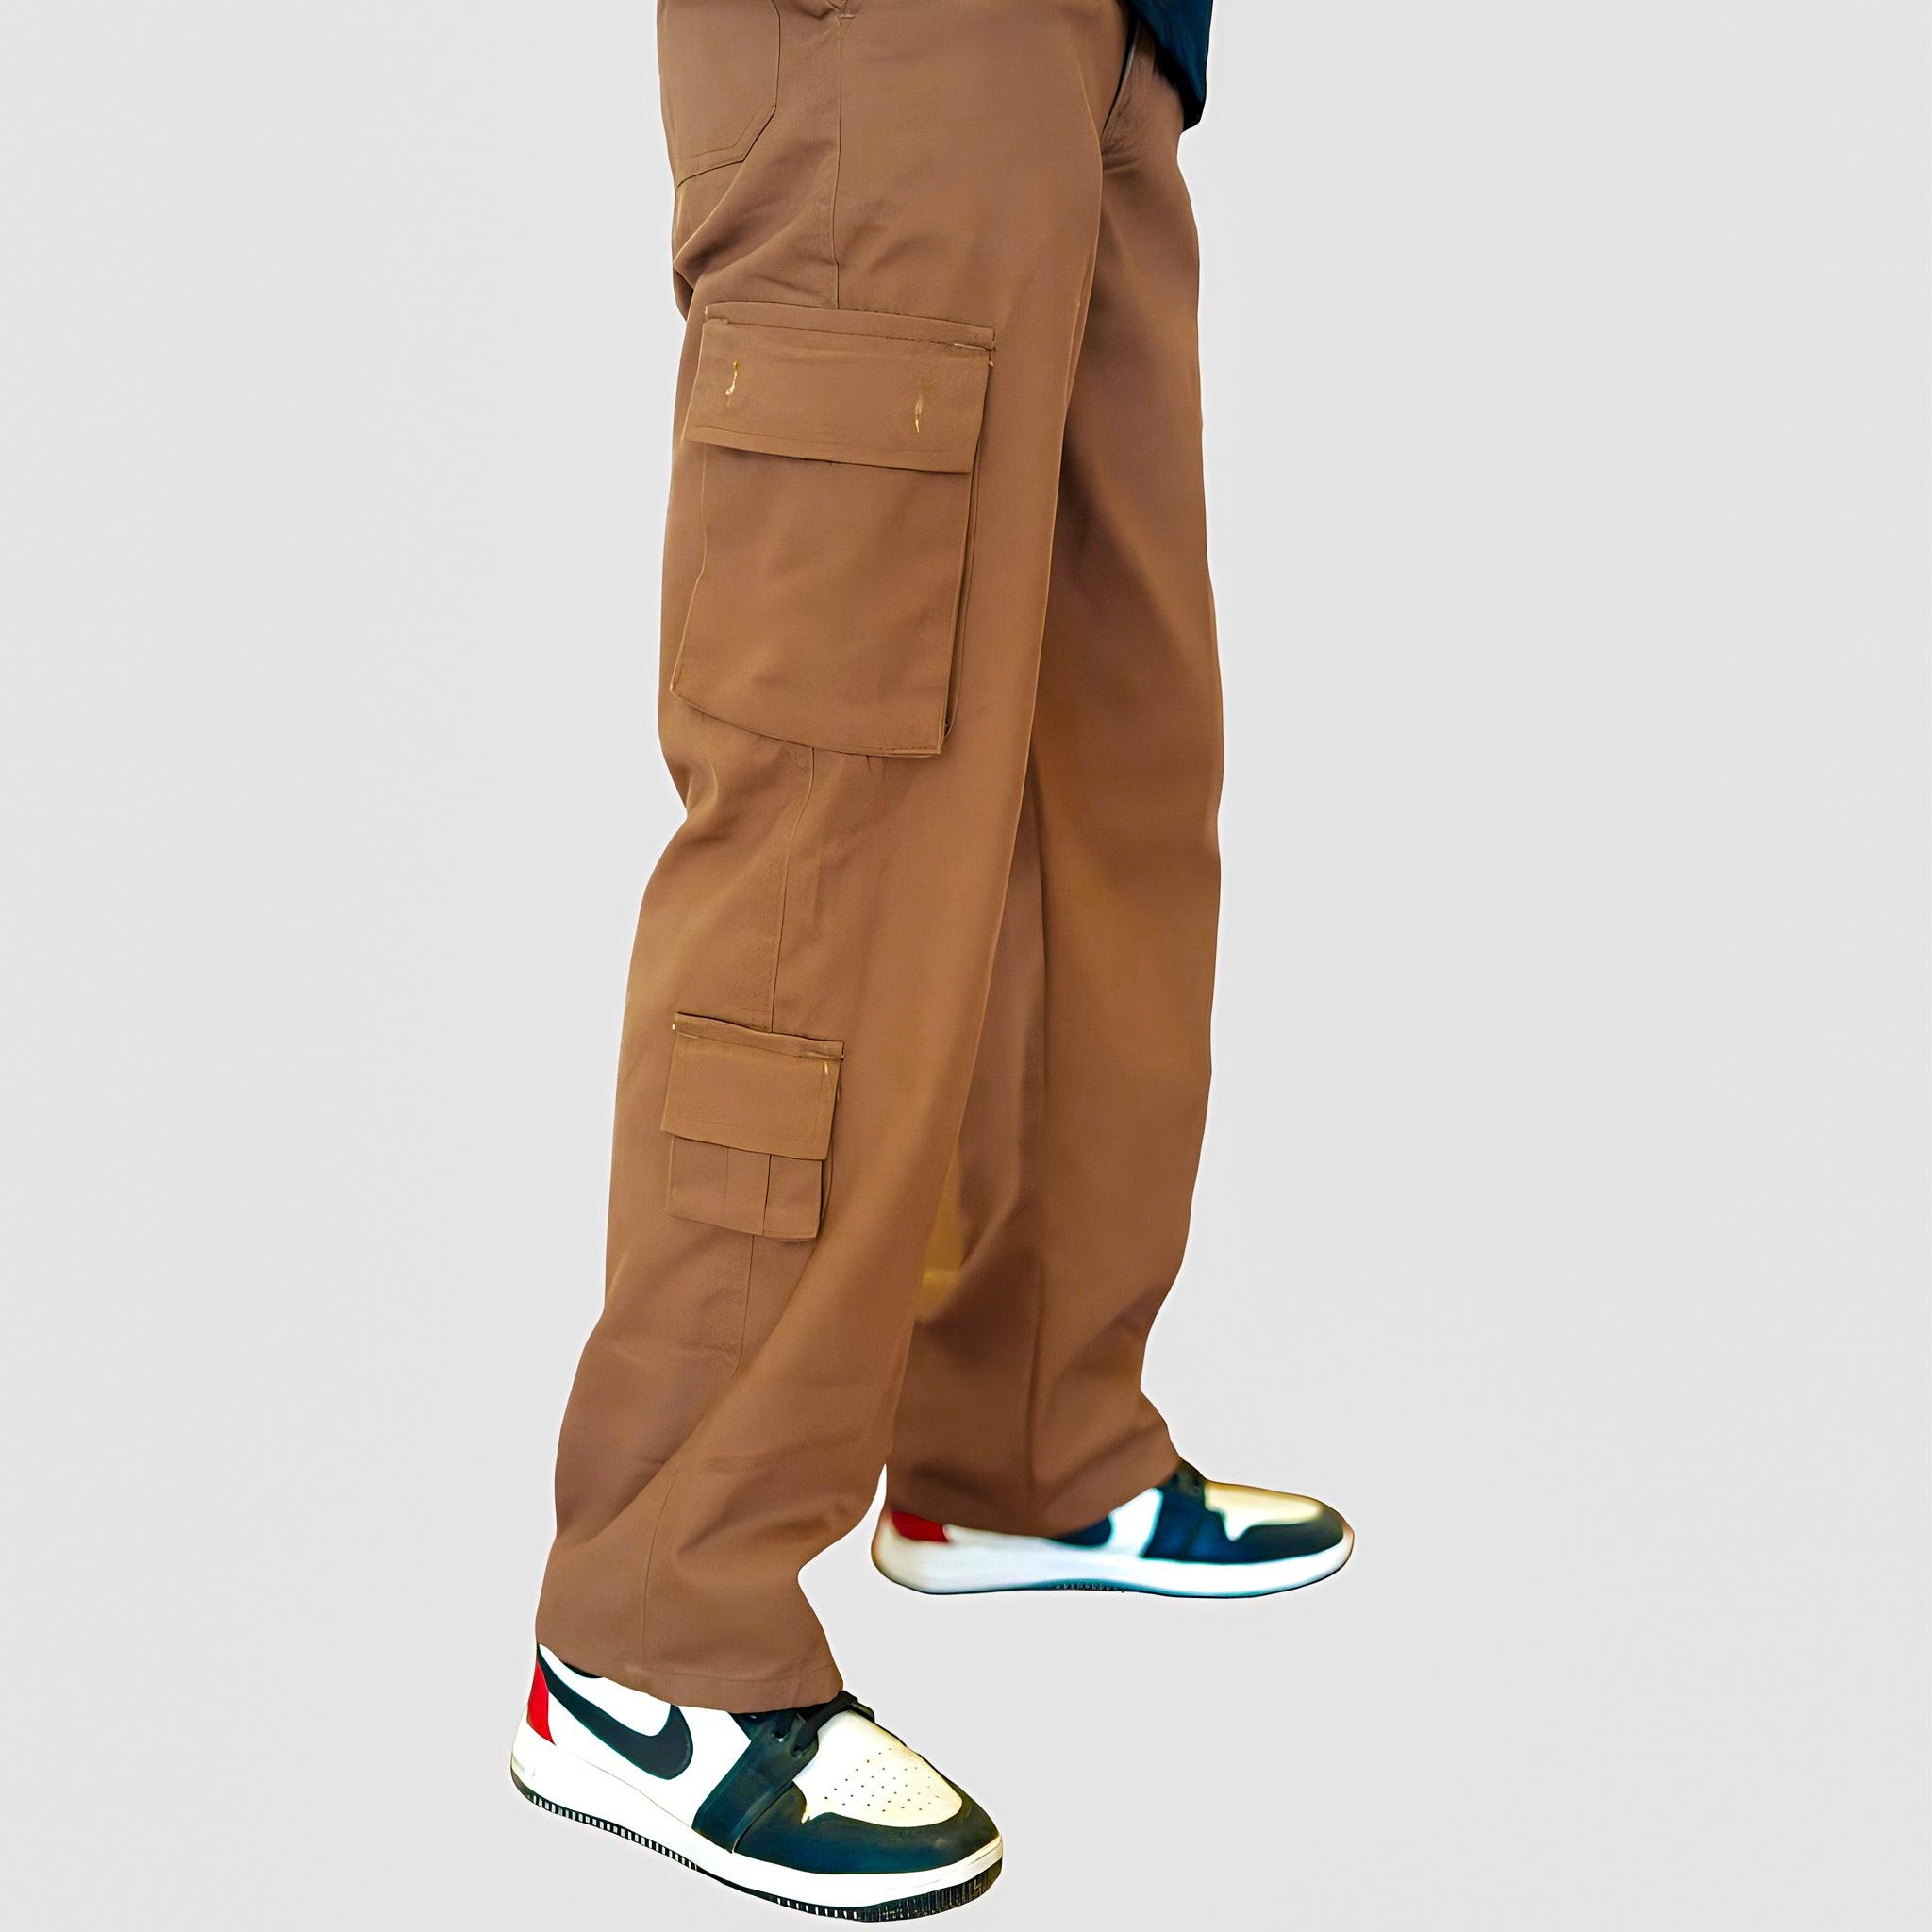 Lolmot High Waist Stretch Cargo Pants Women Baggy Multiple Pockets Relaxed  Fit Straight Wide Leg Casual Y2K Pants Combat Military Trousers -  Walmart.com